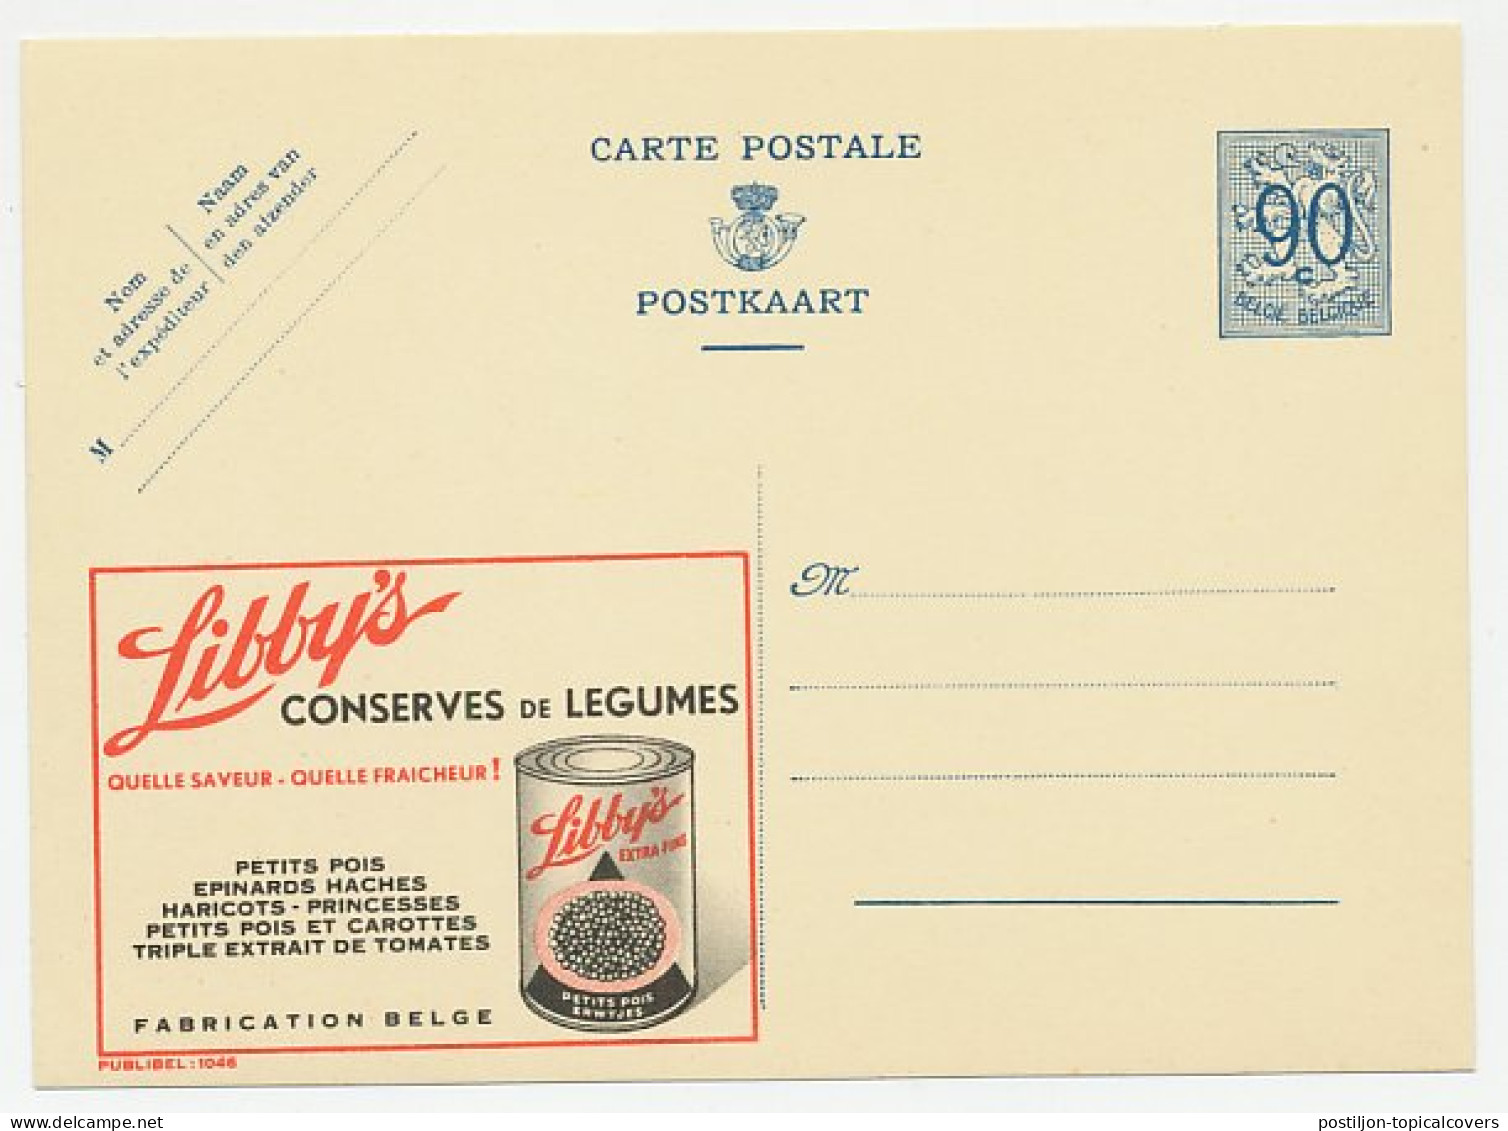 Publibel - Postal Stationery Belgium 1951 Canned Vegetables - Pea - Spinach - Beans - Carrots - Tomatoes - Legumbres